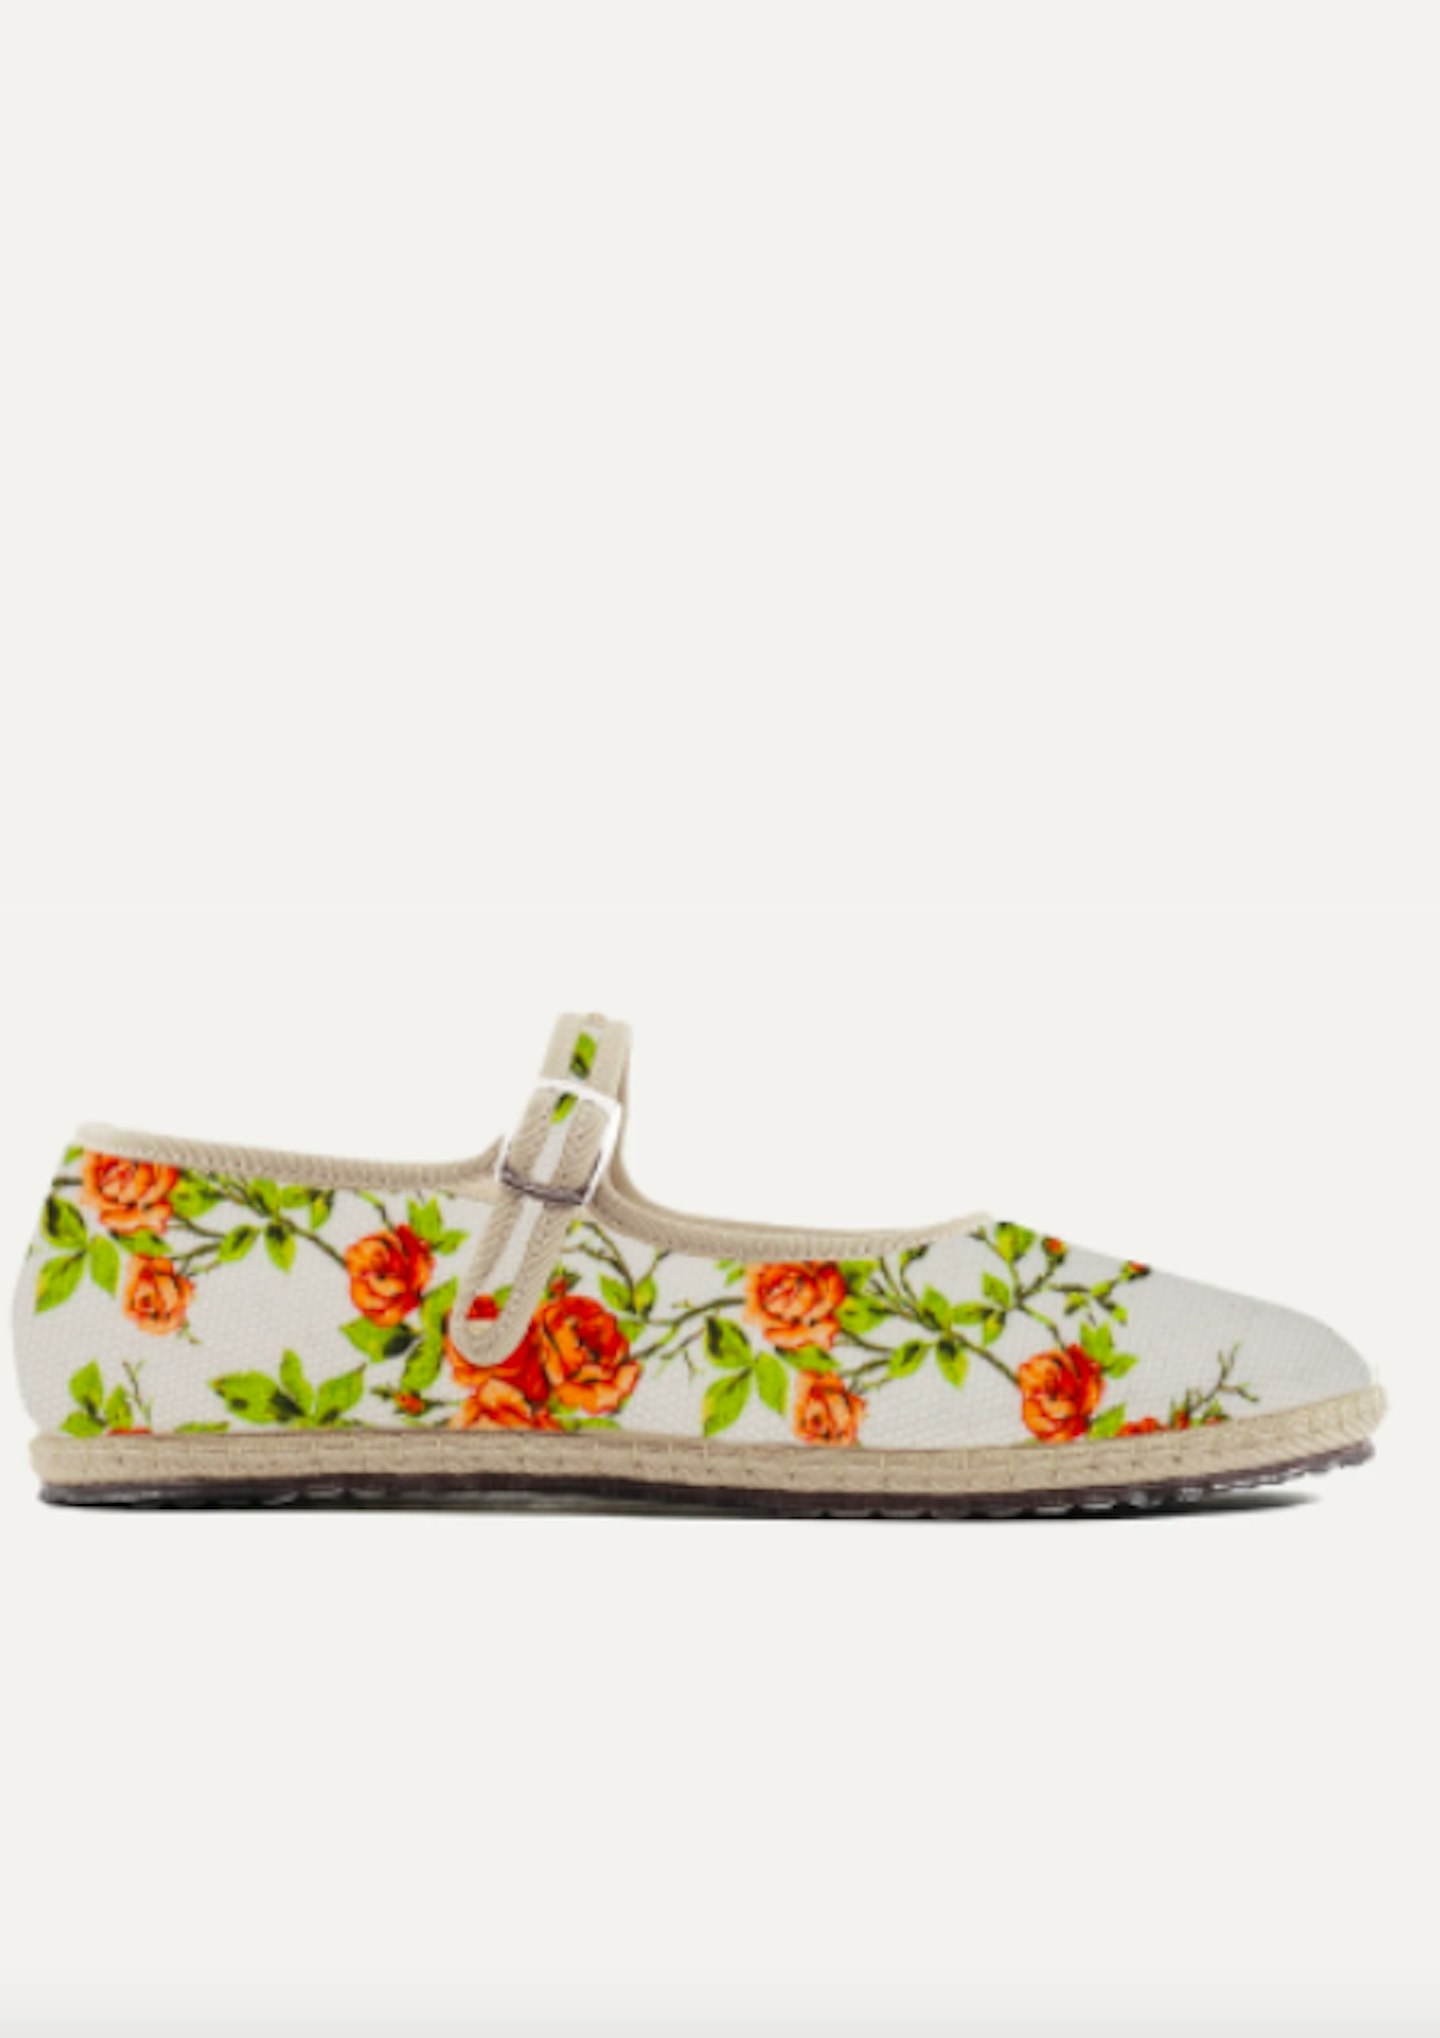 Mixed Floral Mary-Jane Shoes, £140